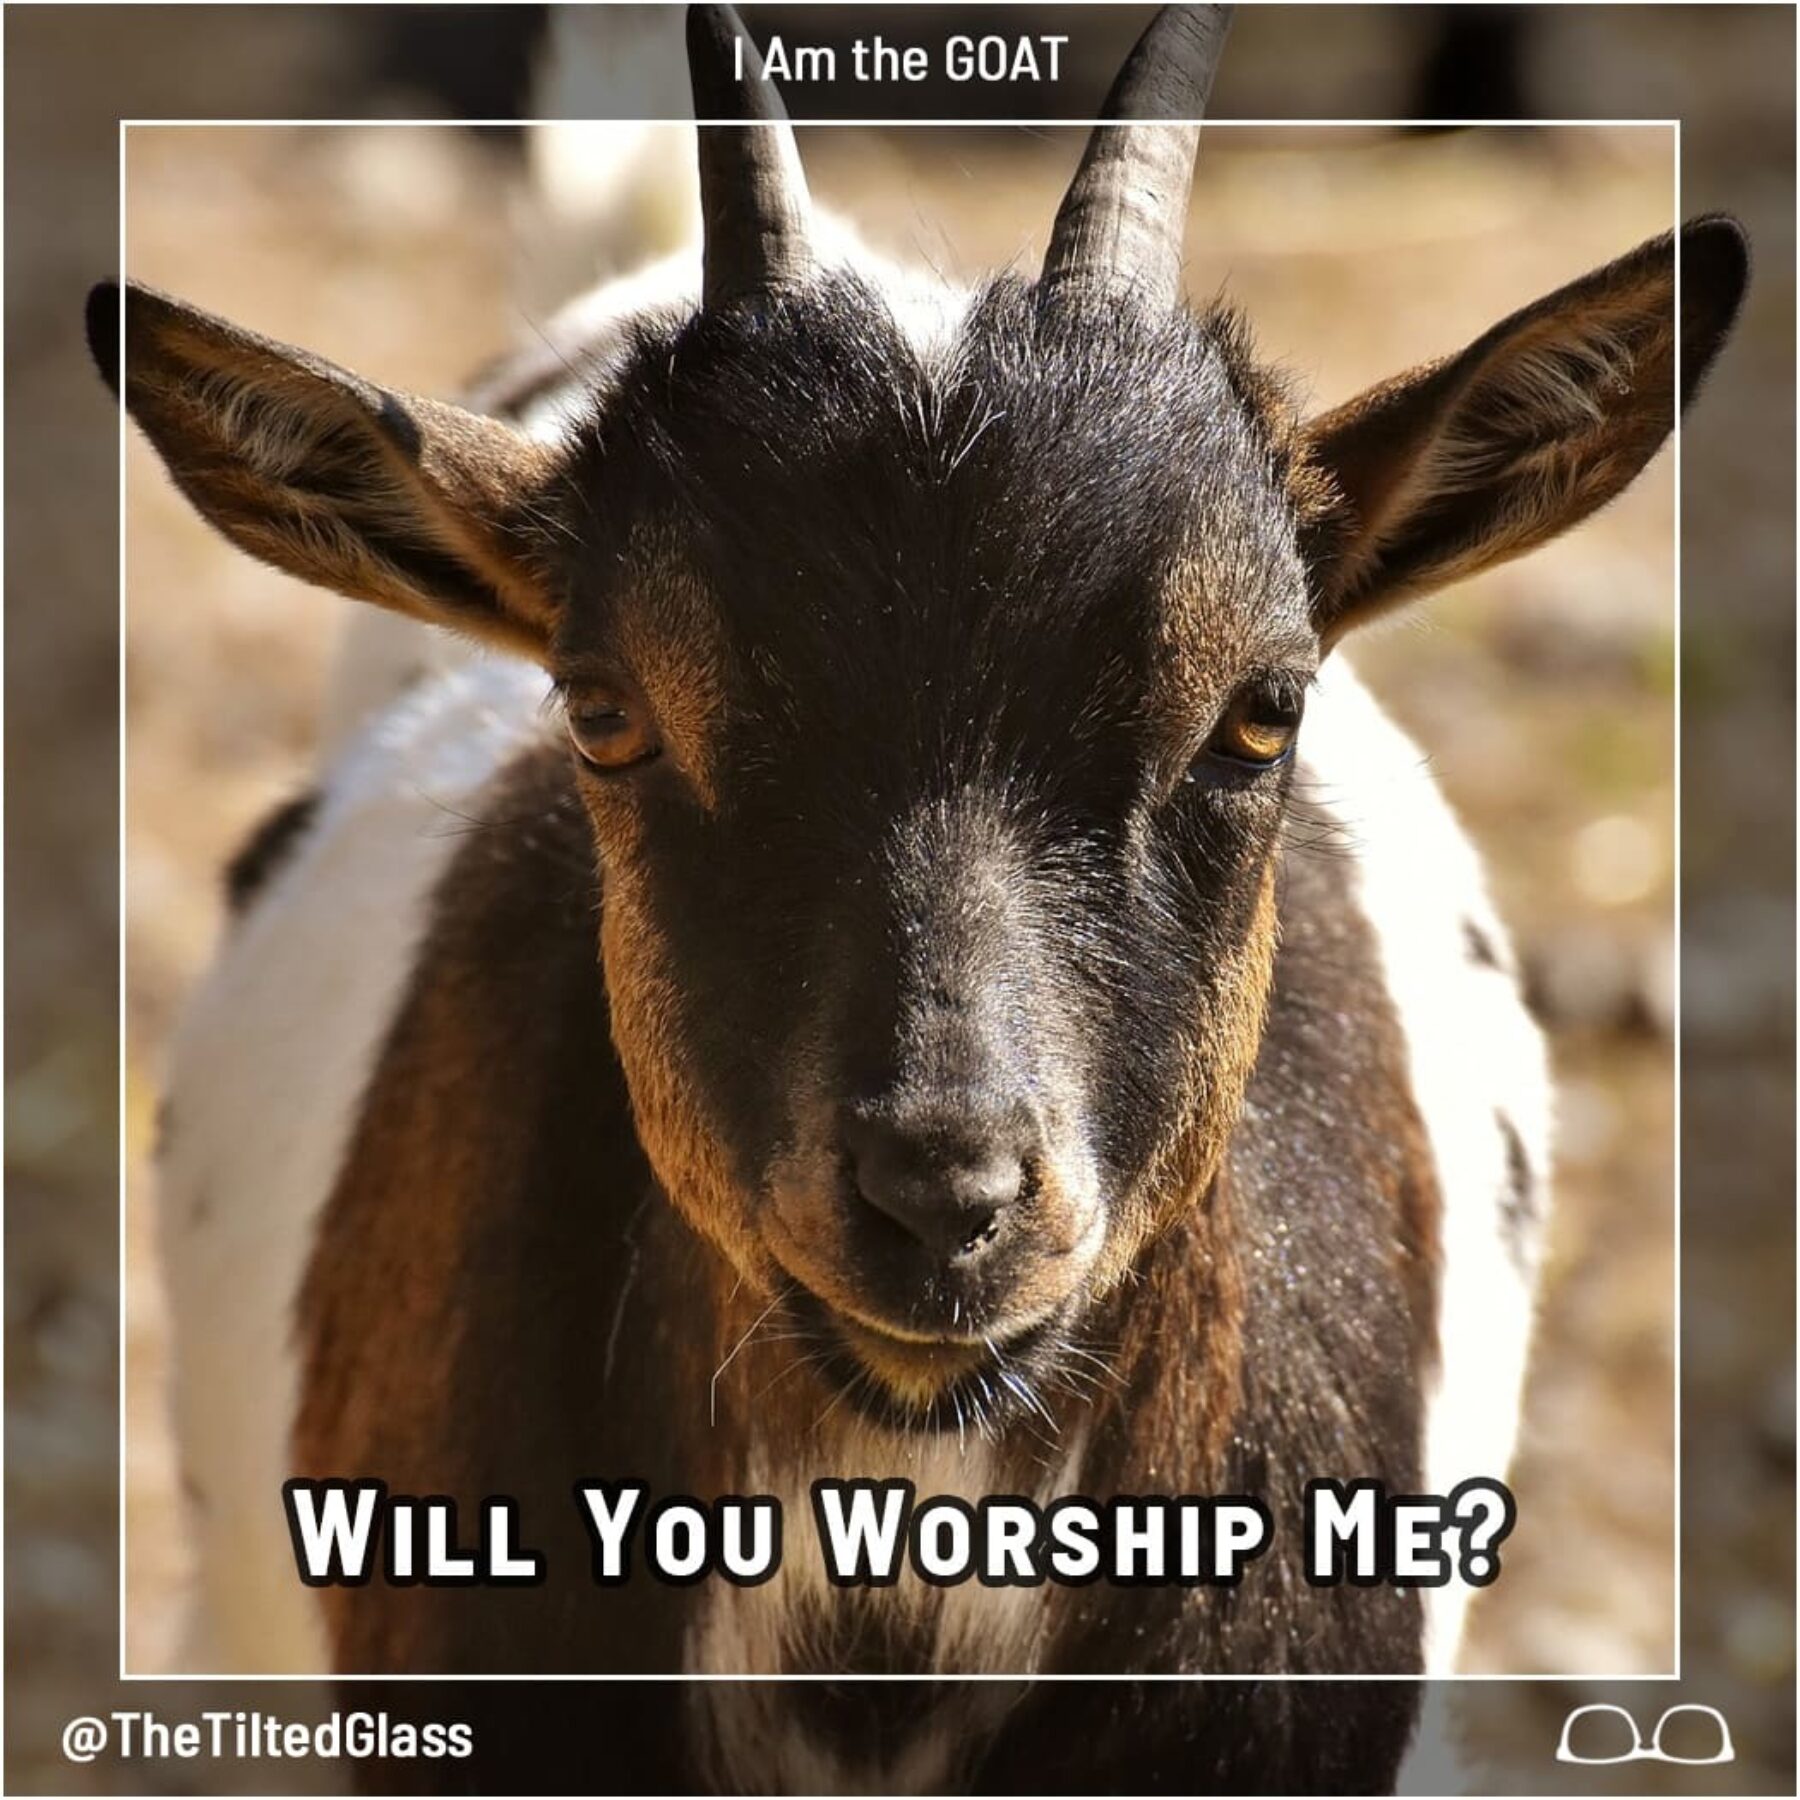 Will You Worship The Goat? 7 Goat Photos For You to Decide